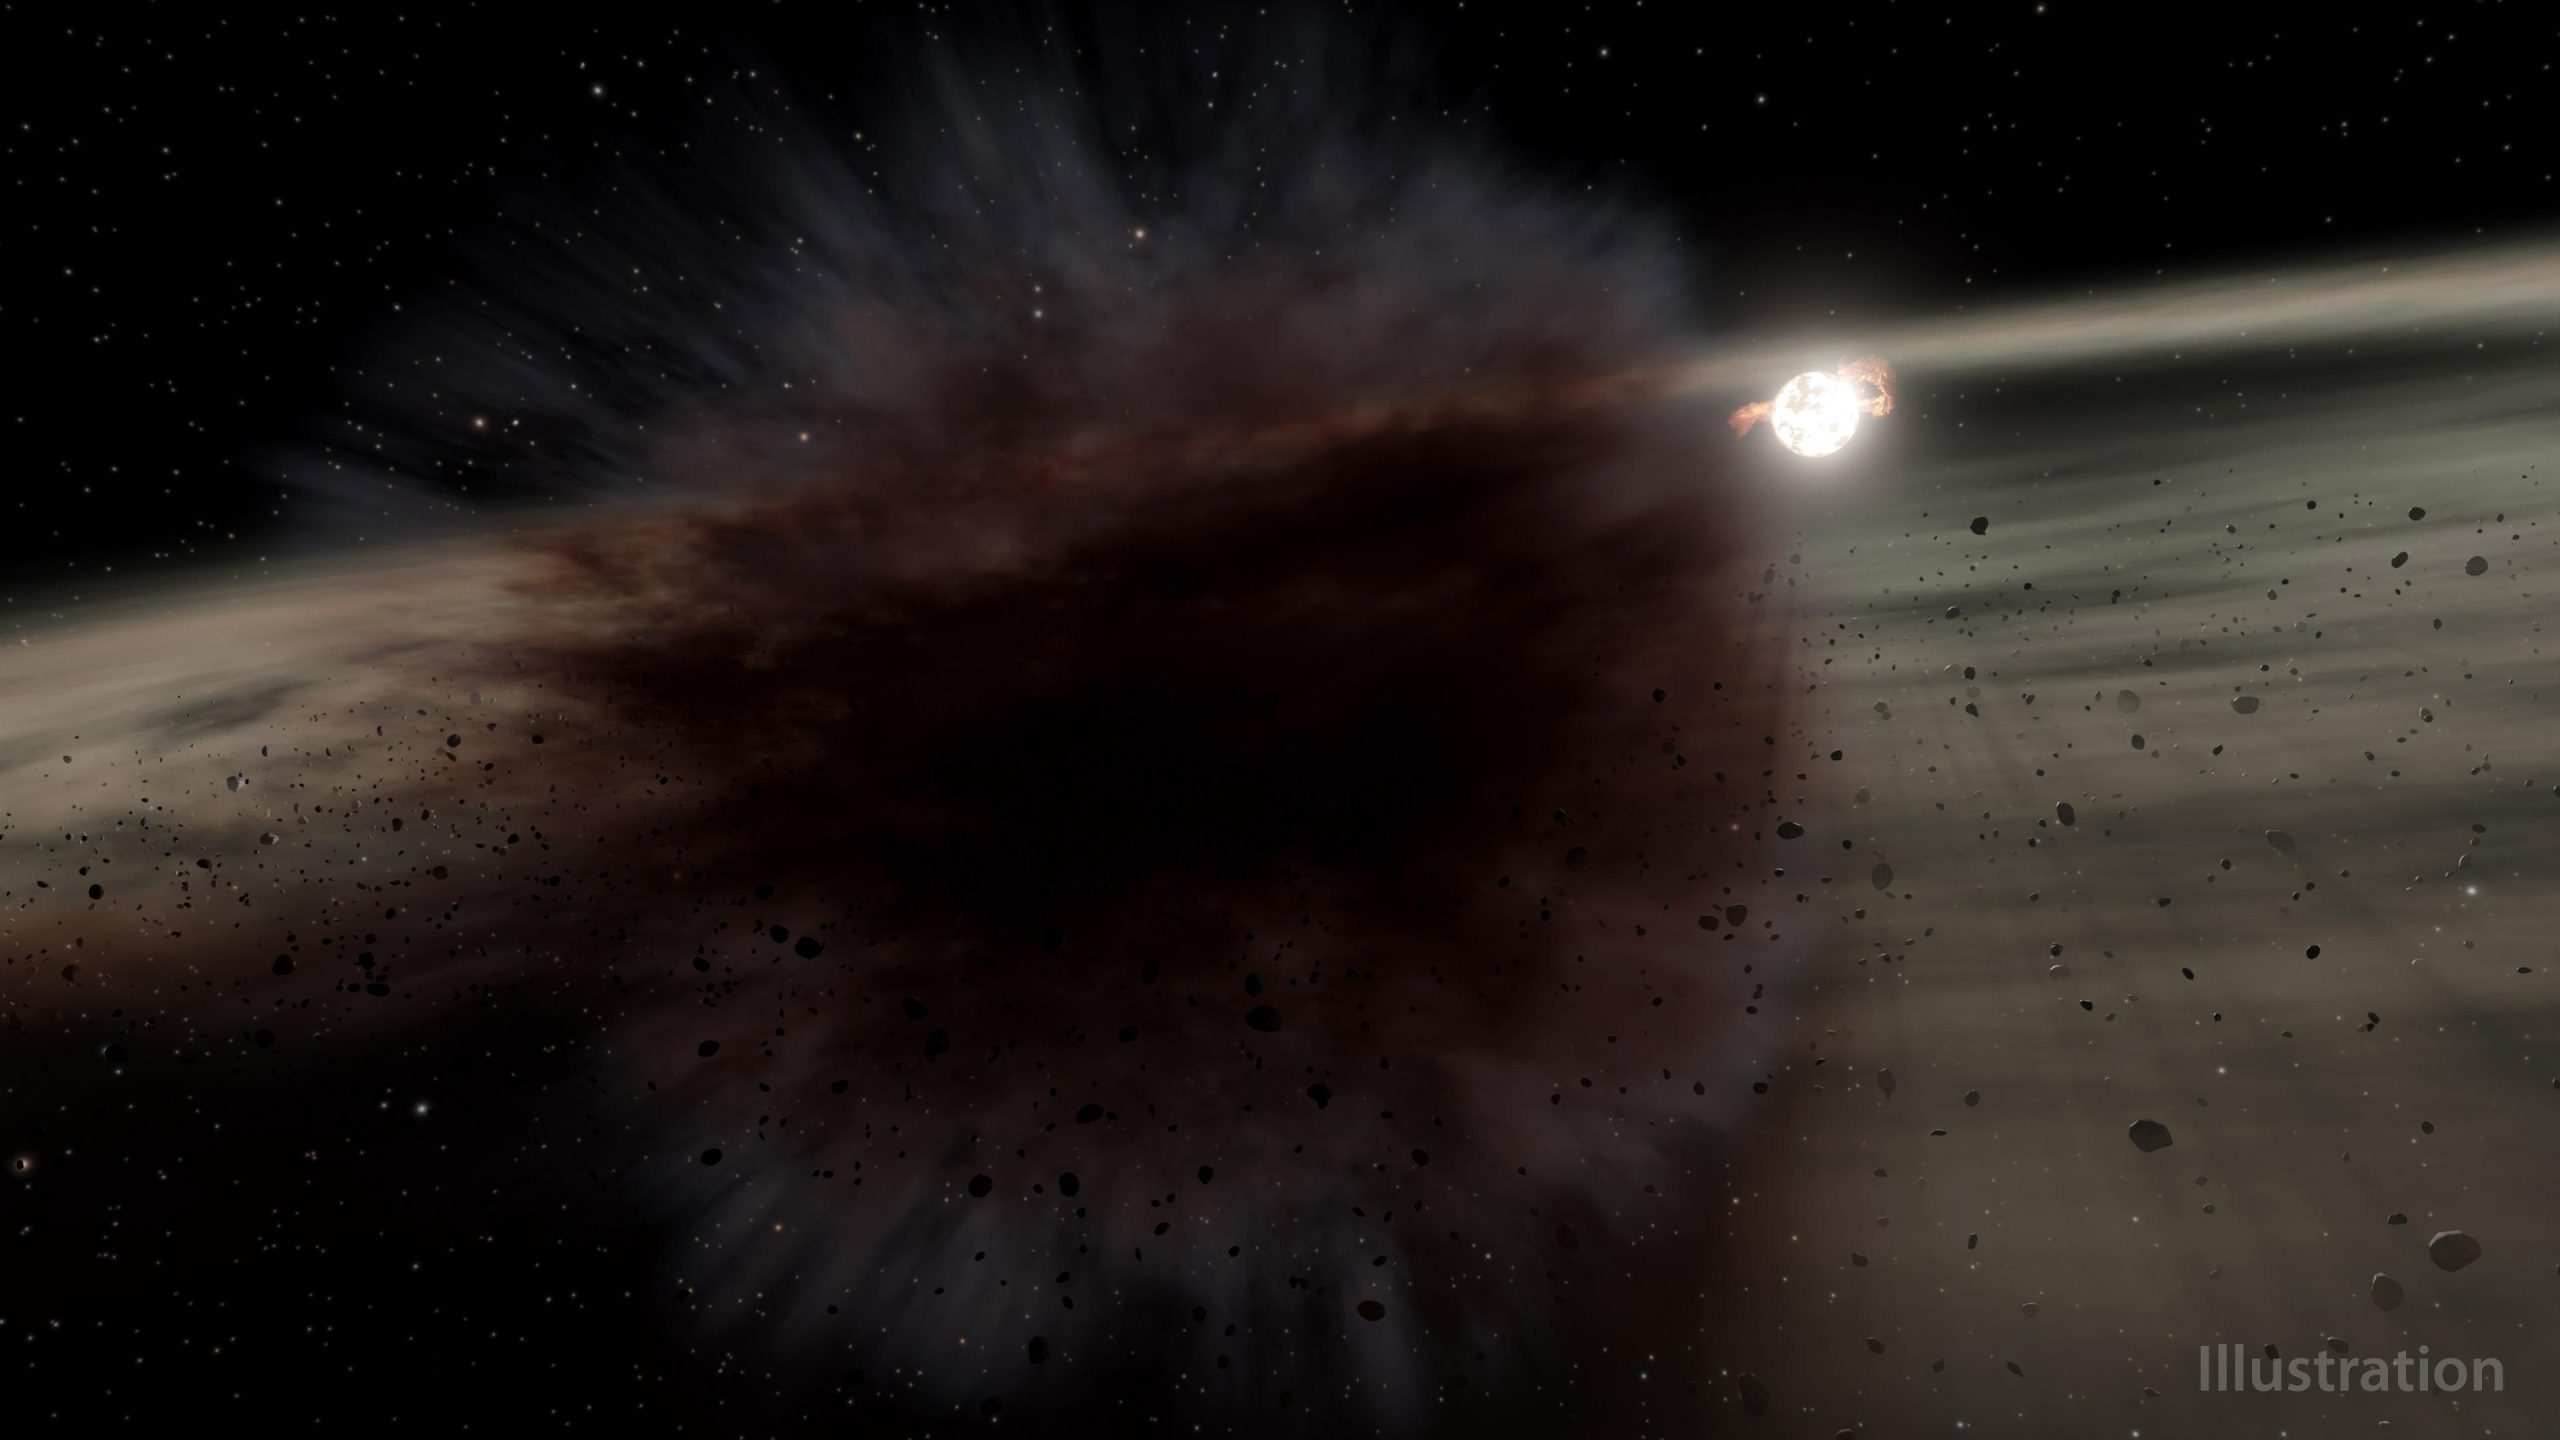 They found a cloud of dust the size of a star caused by the collision of huge asteroids